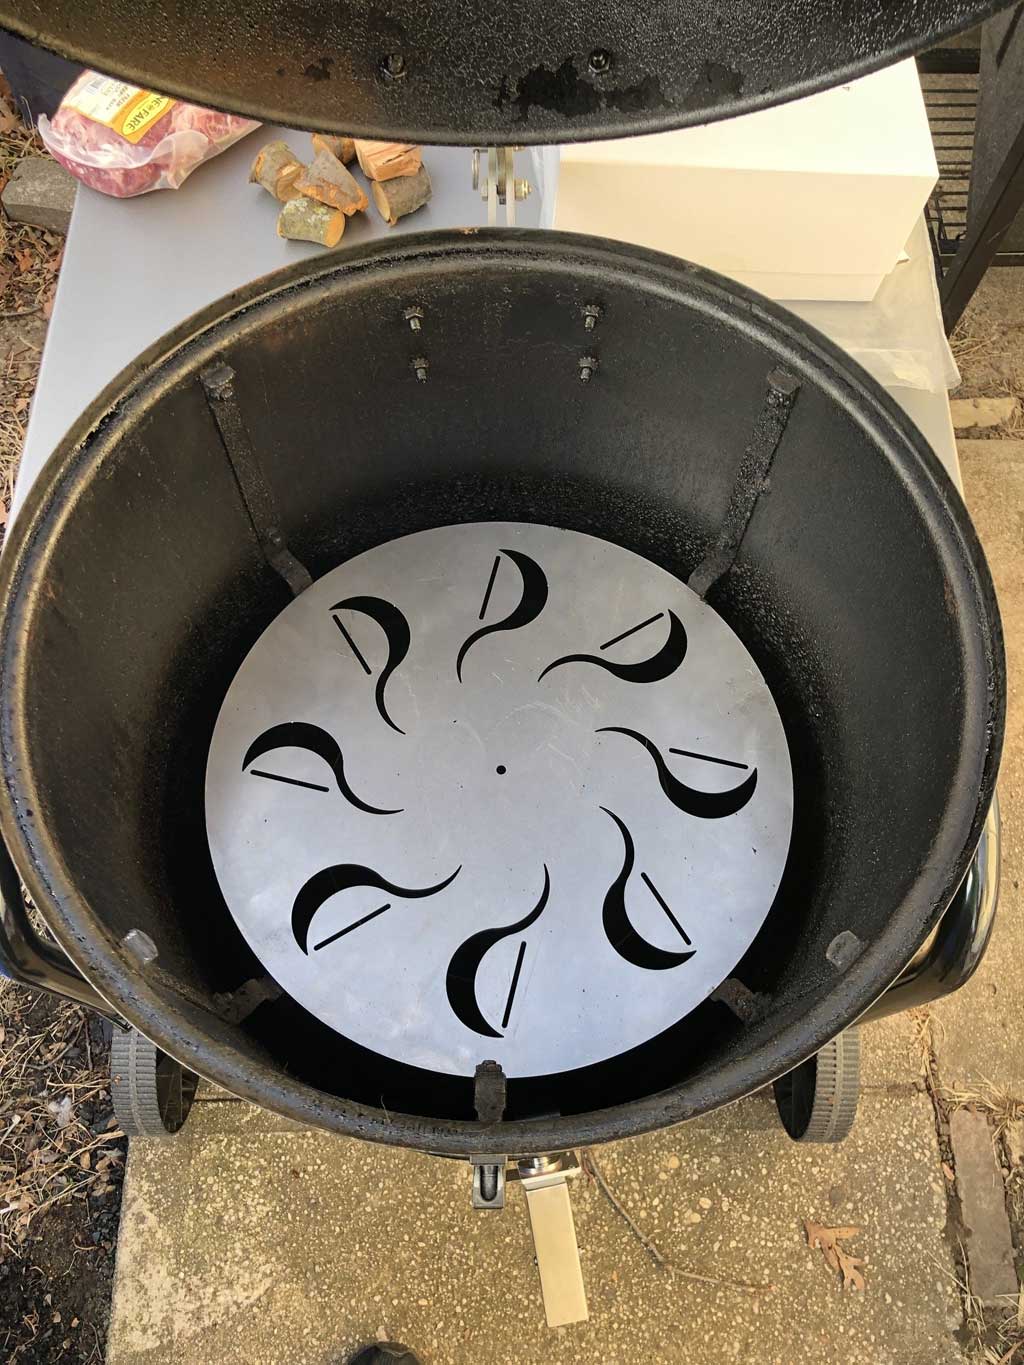 Alternative Water Pans & Diffusers For Weber Smokers - The Virtual